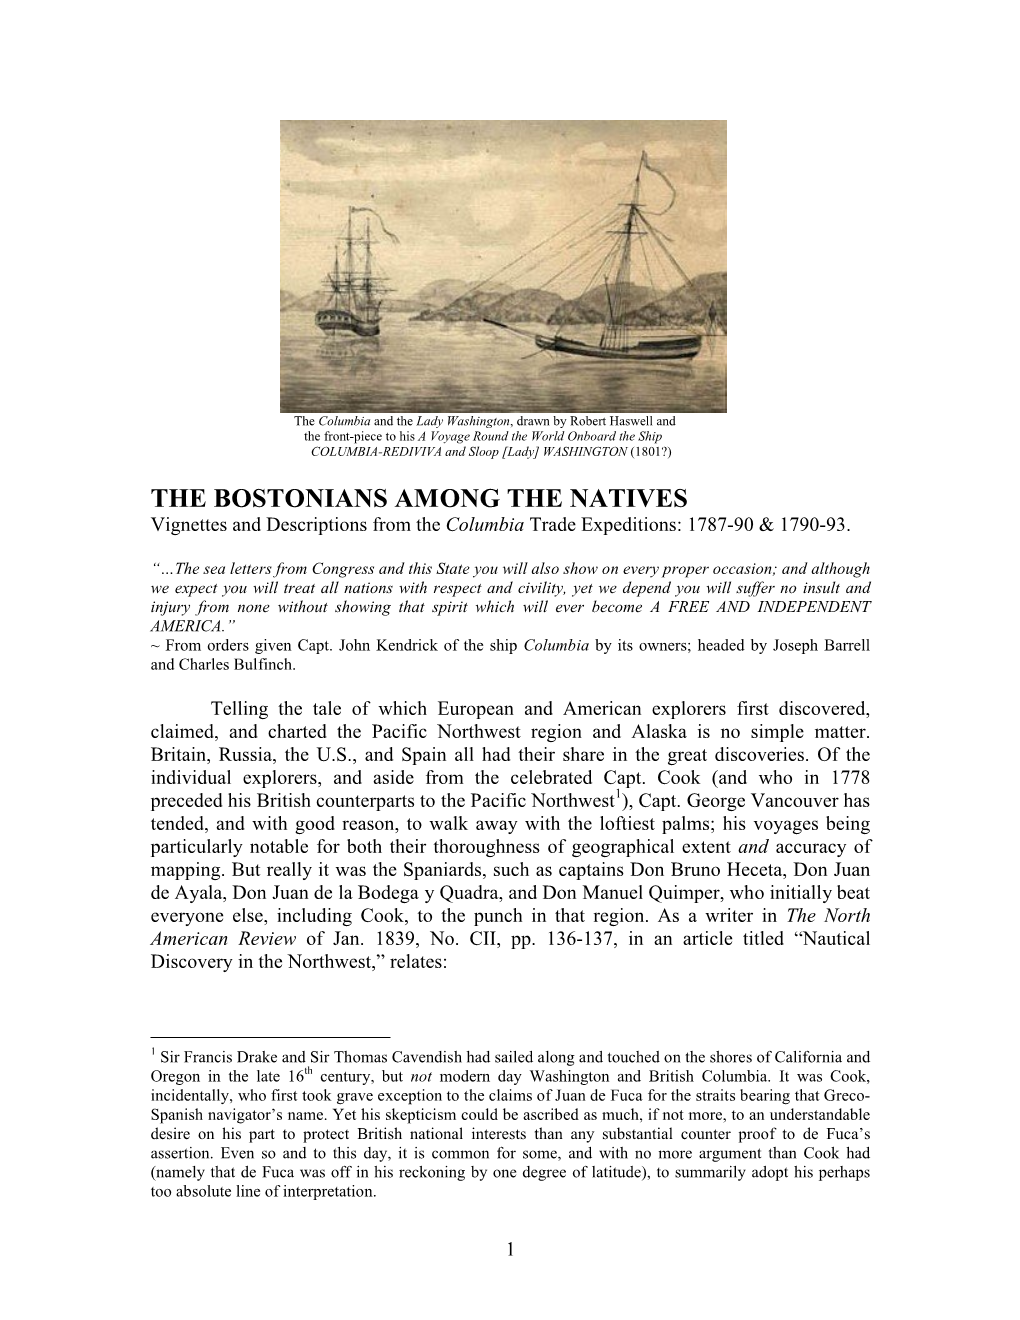 THE BOSTONIANS AMONG the NATIVES Vignettes and Descriptions from the Columbia Trade Expeditions: 1787-90 & 1790-93